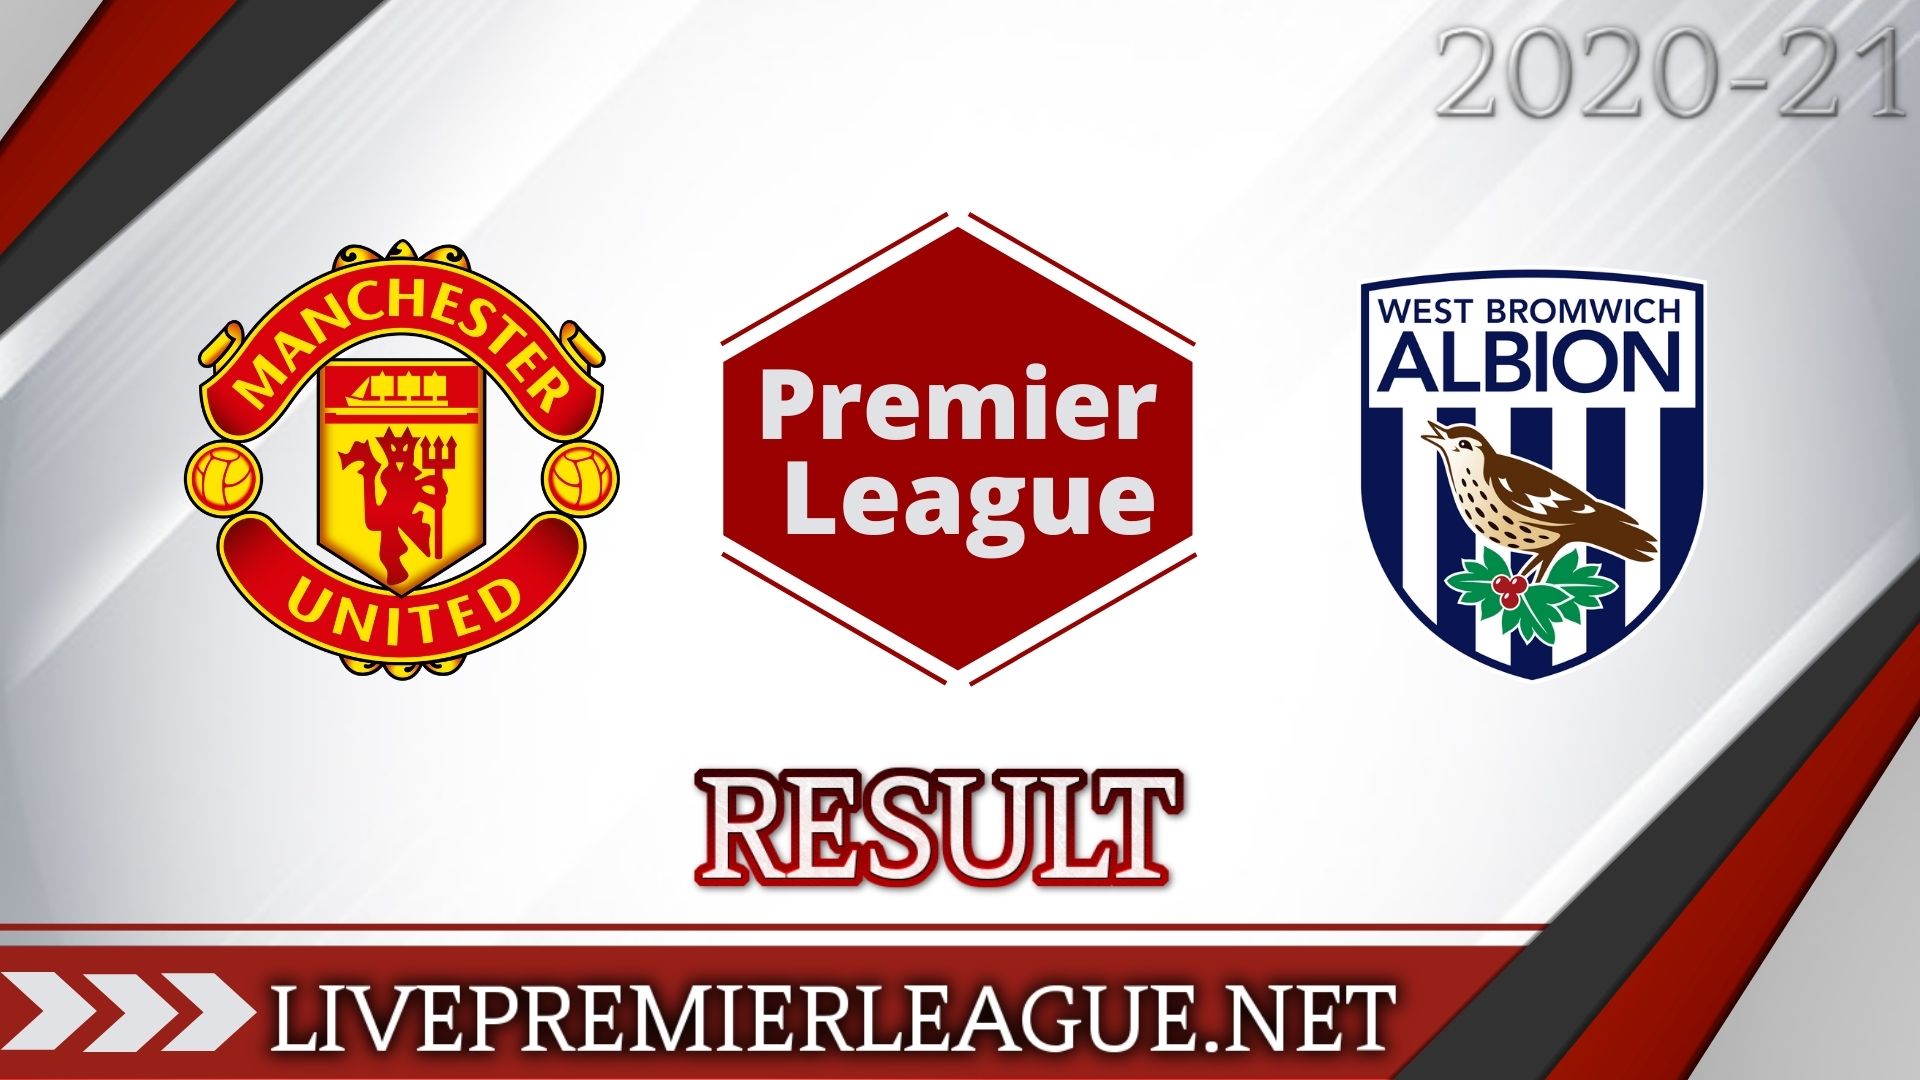 Manchester United Vs West Bromwich Albion | Week 9 Result 2020